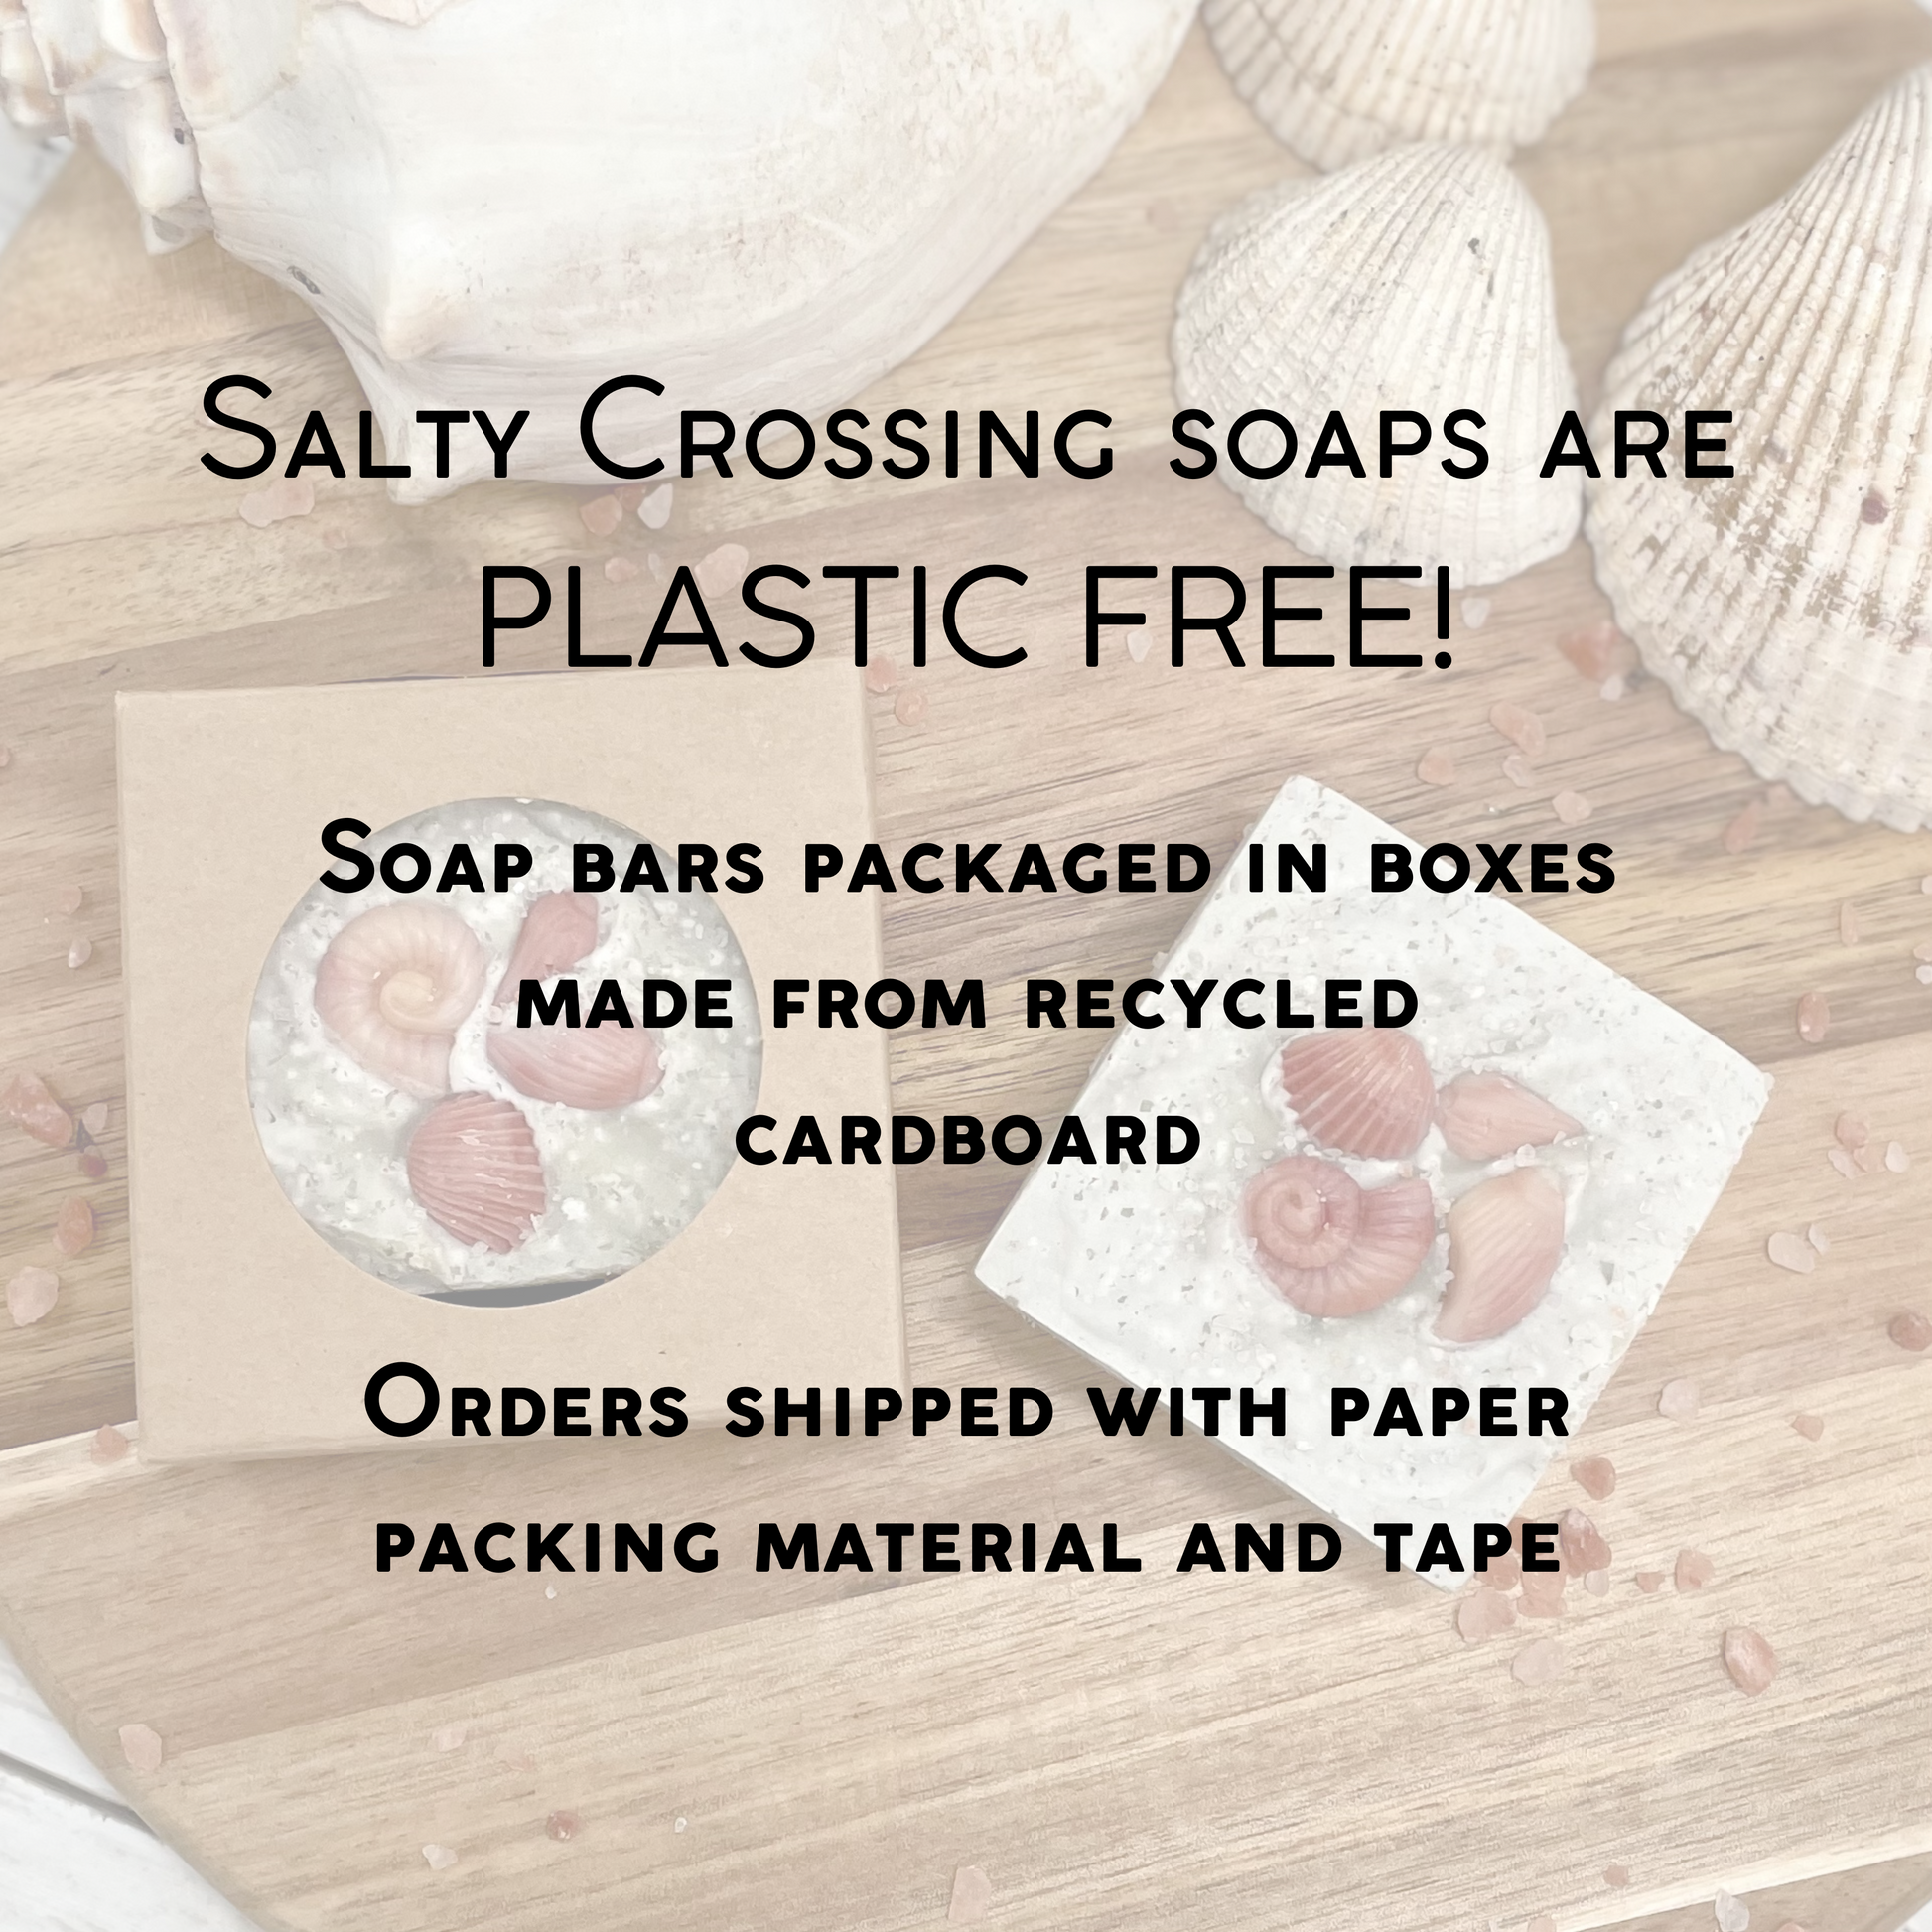 Salty Crossing soaps are plastic free. soap bars packaged in boxes made from recycled cardboard. orders shipped with paper packing material and tape. graphic.